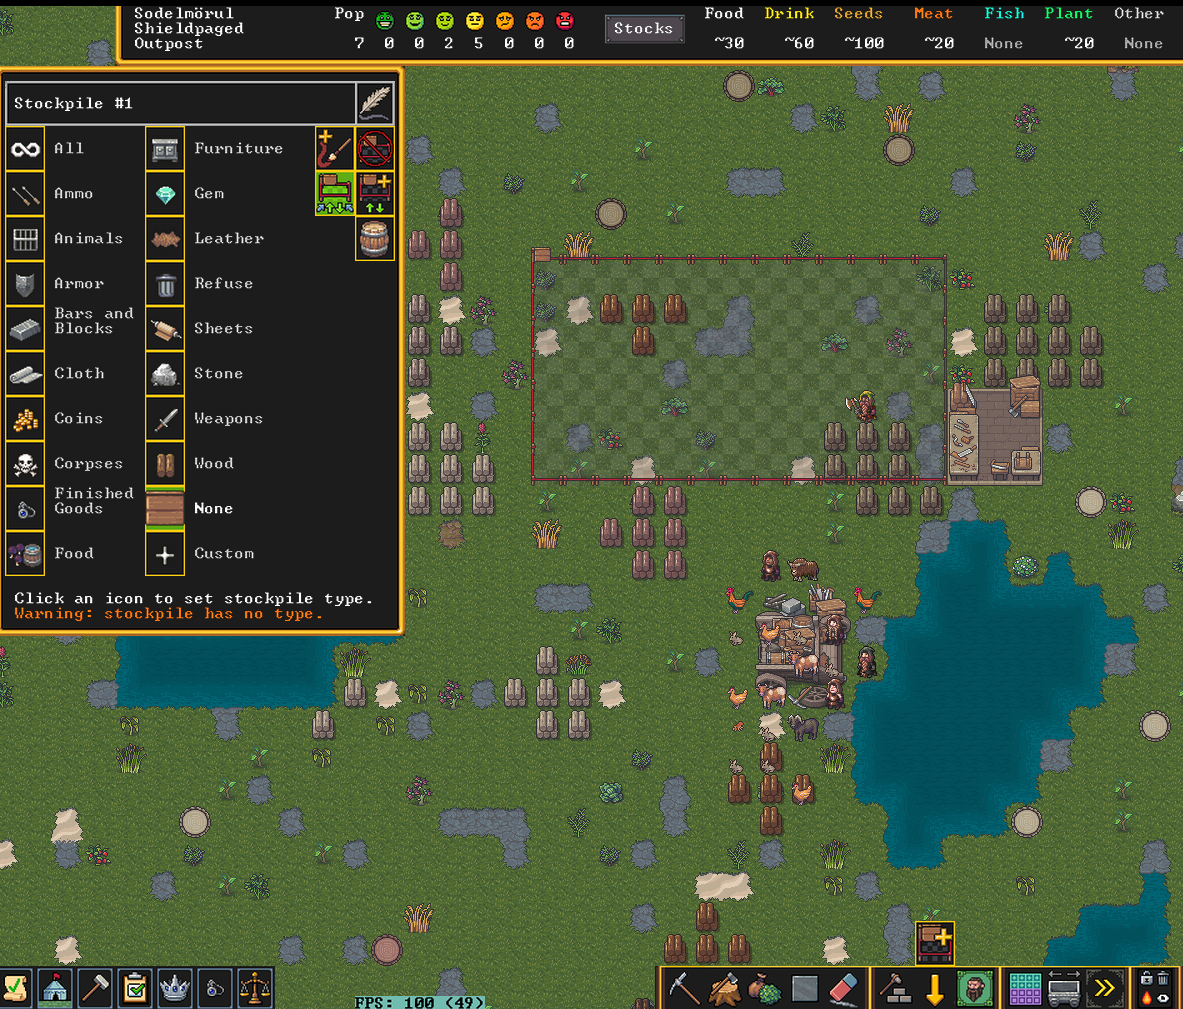 Dwarf Fortress Aquifer Guide and Pond Guide image 5